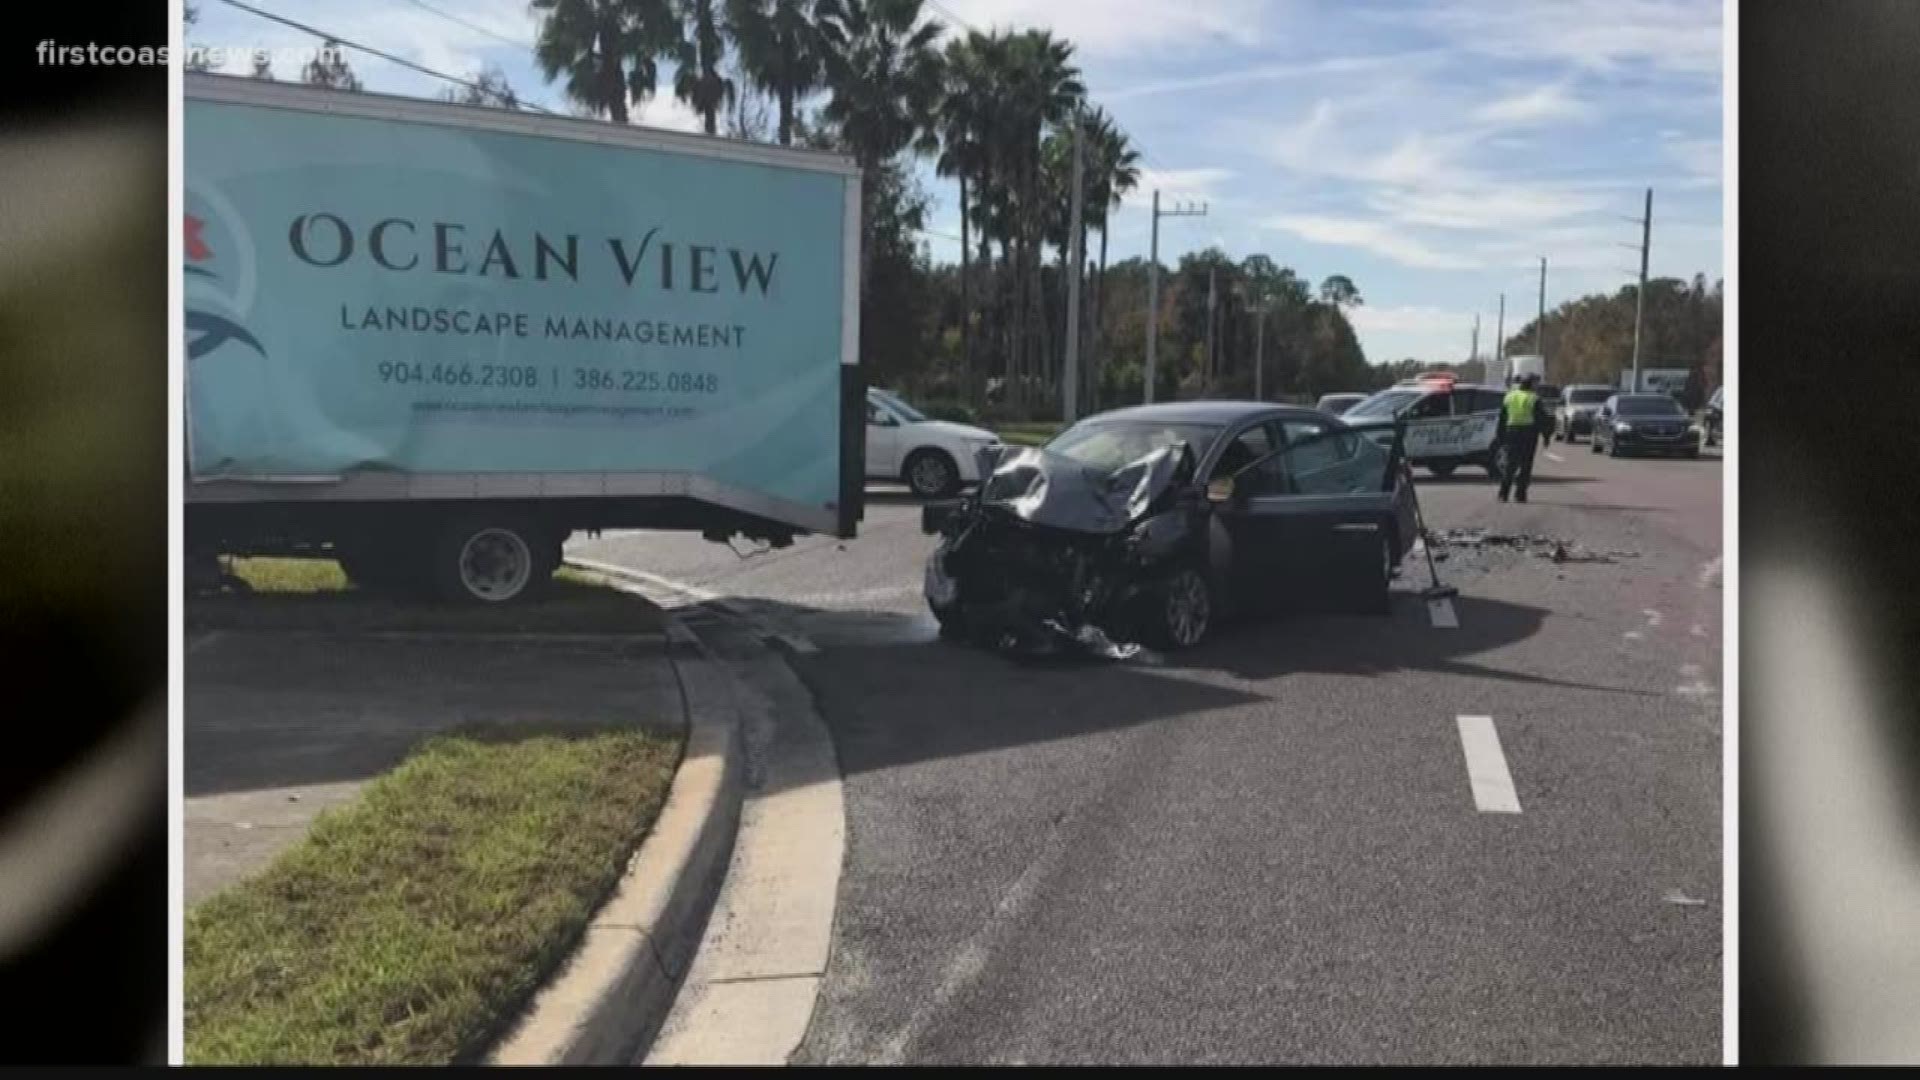 A traffic crash with injuries resulted in a temporary roadblock on SR-207 in St. Johns County.